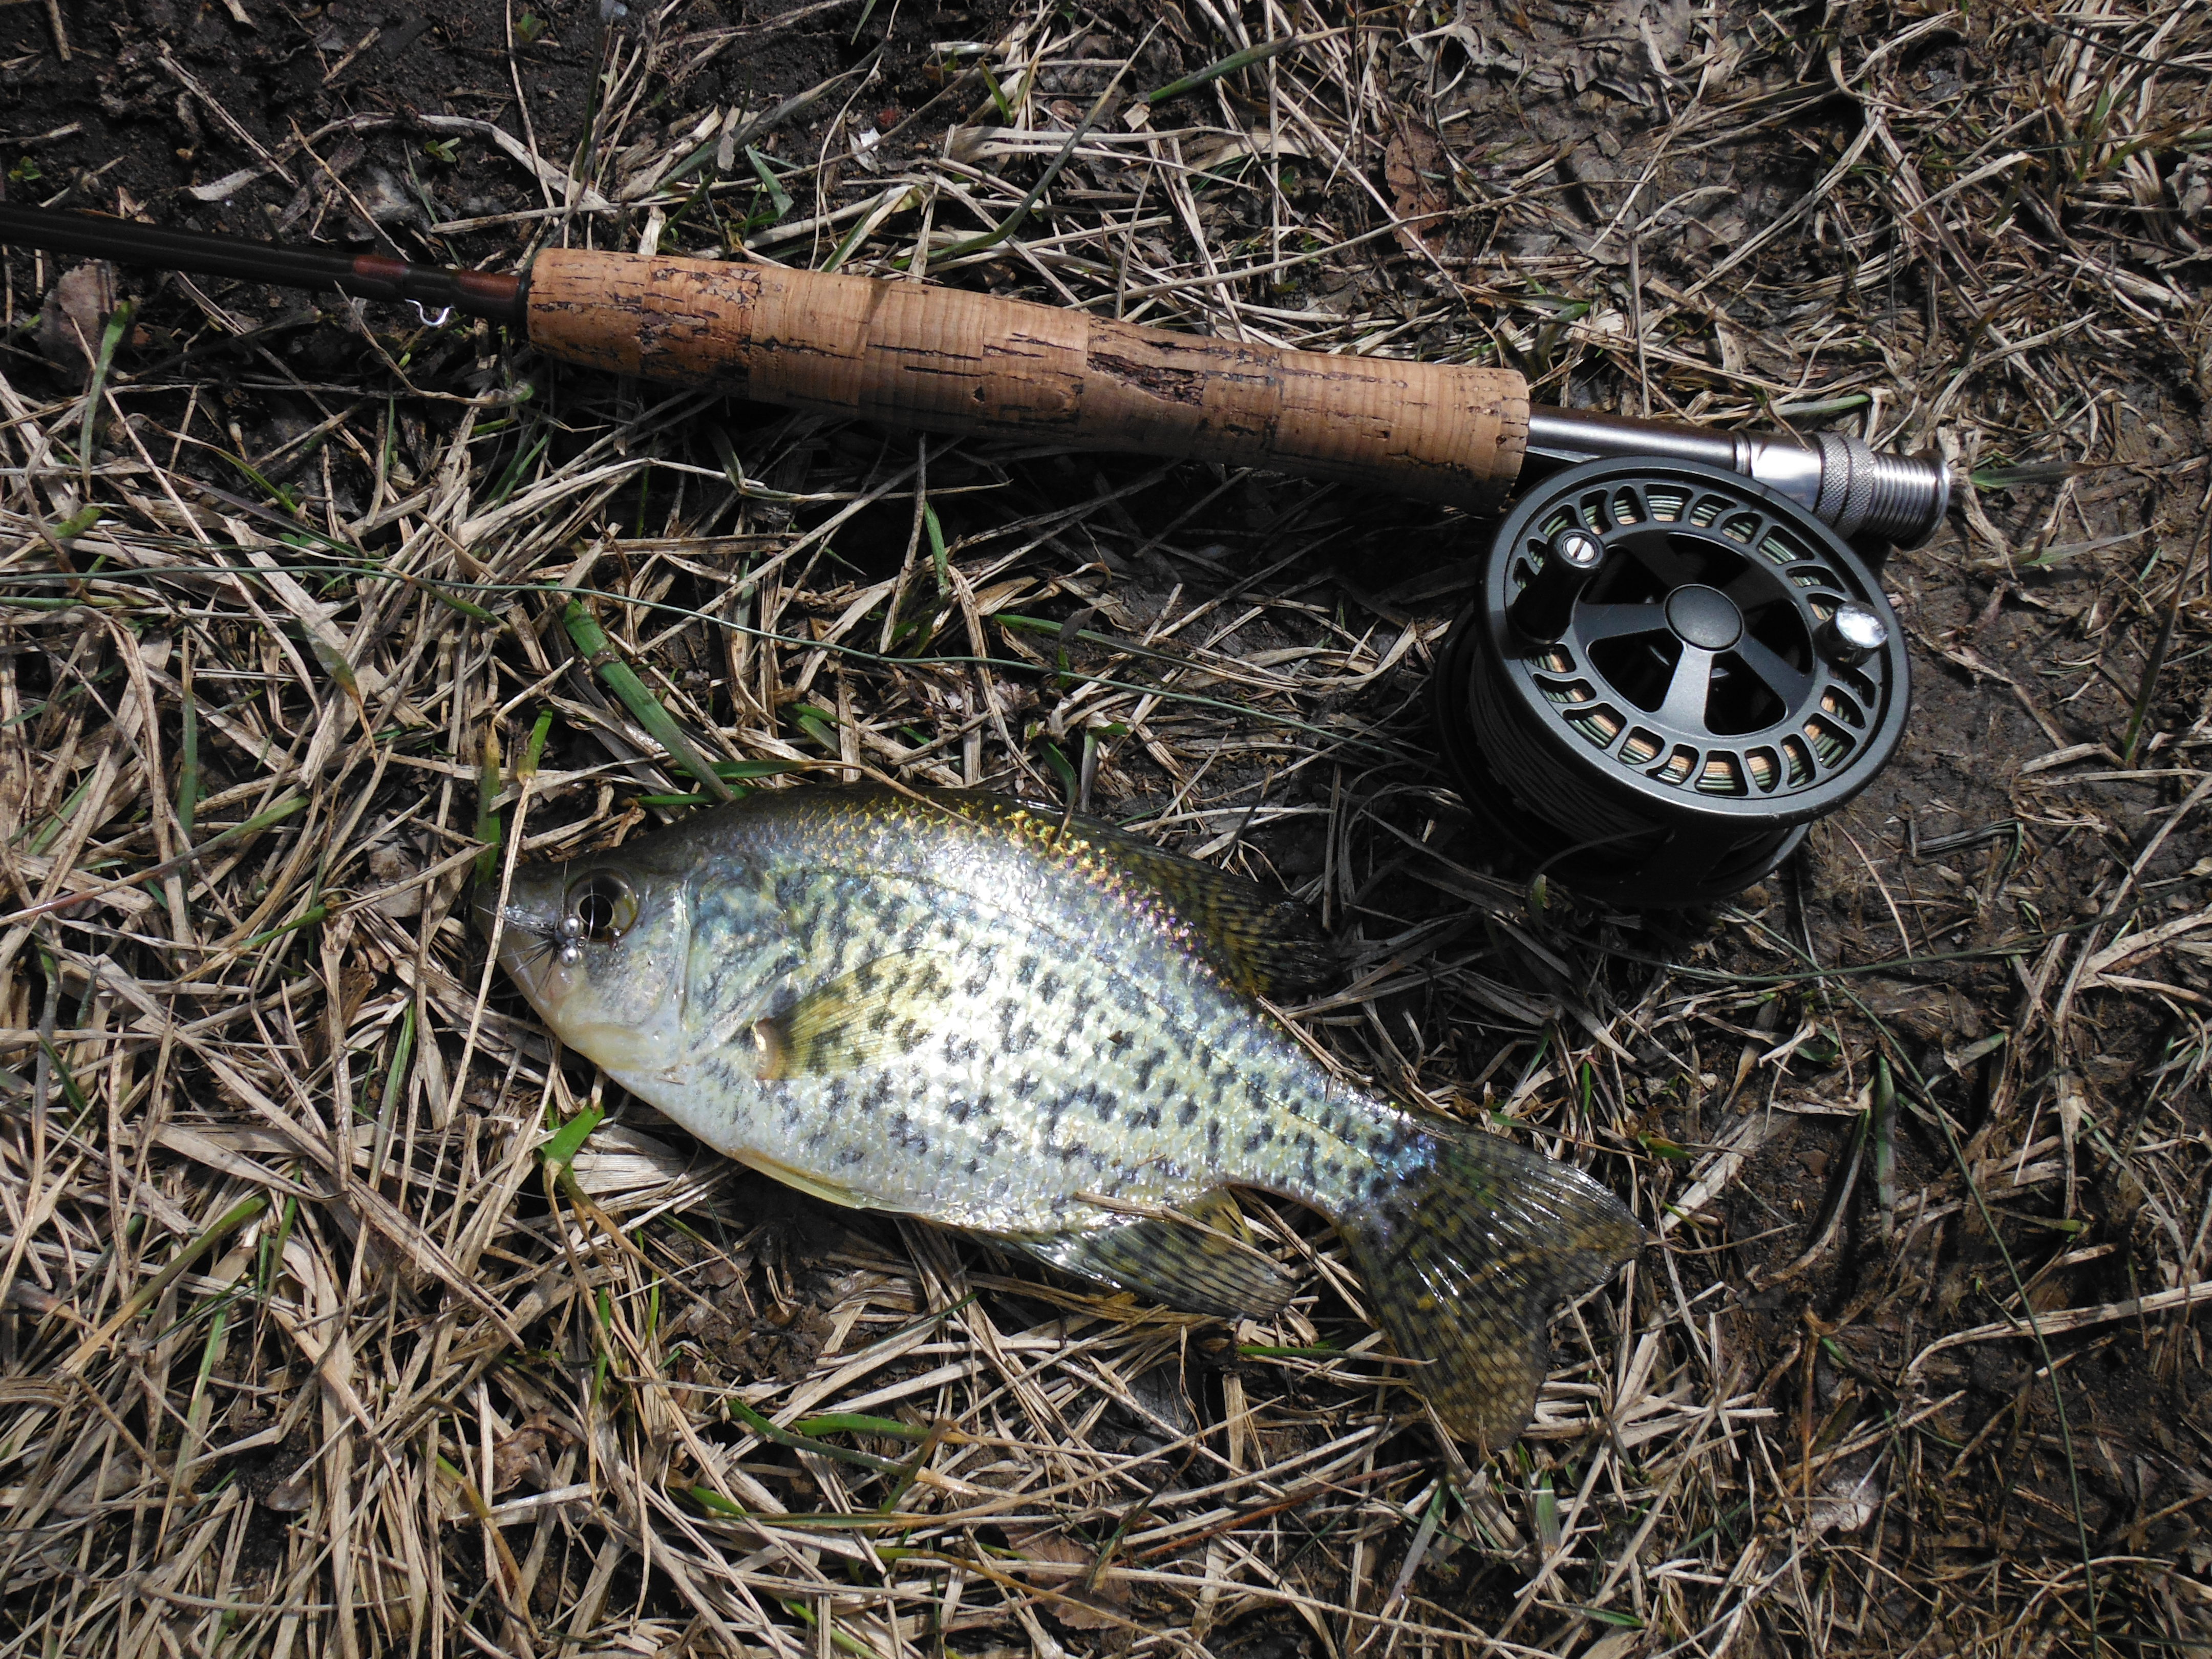 It has spots but it's not a trout - but after this winter, WHO CARES???